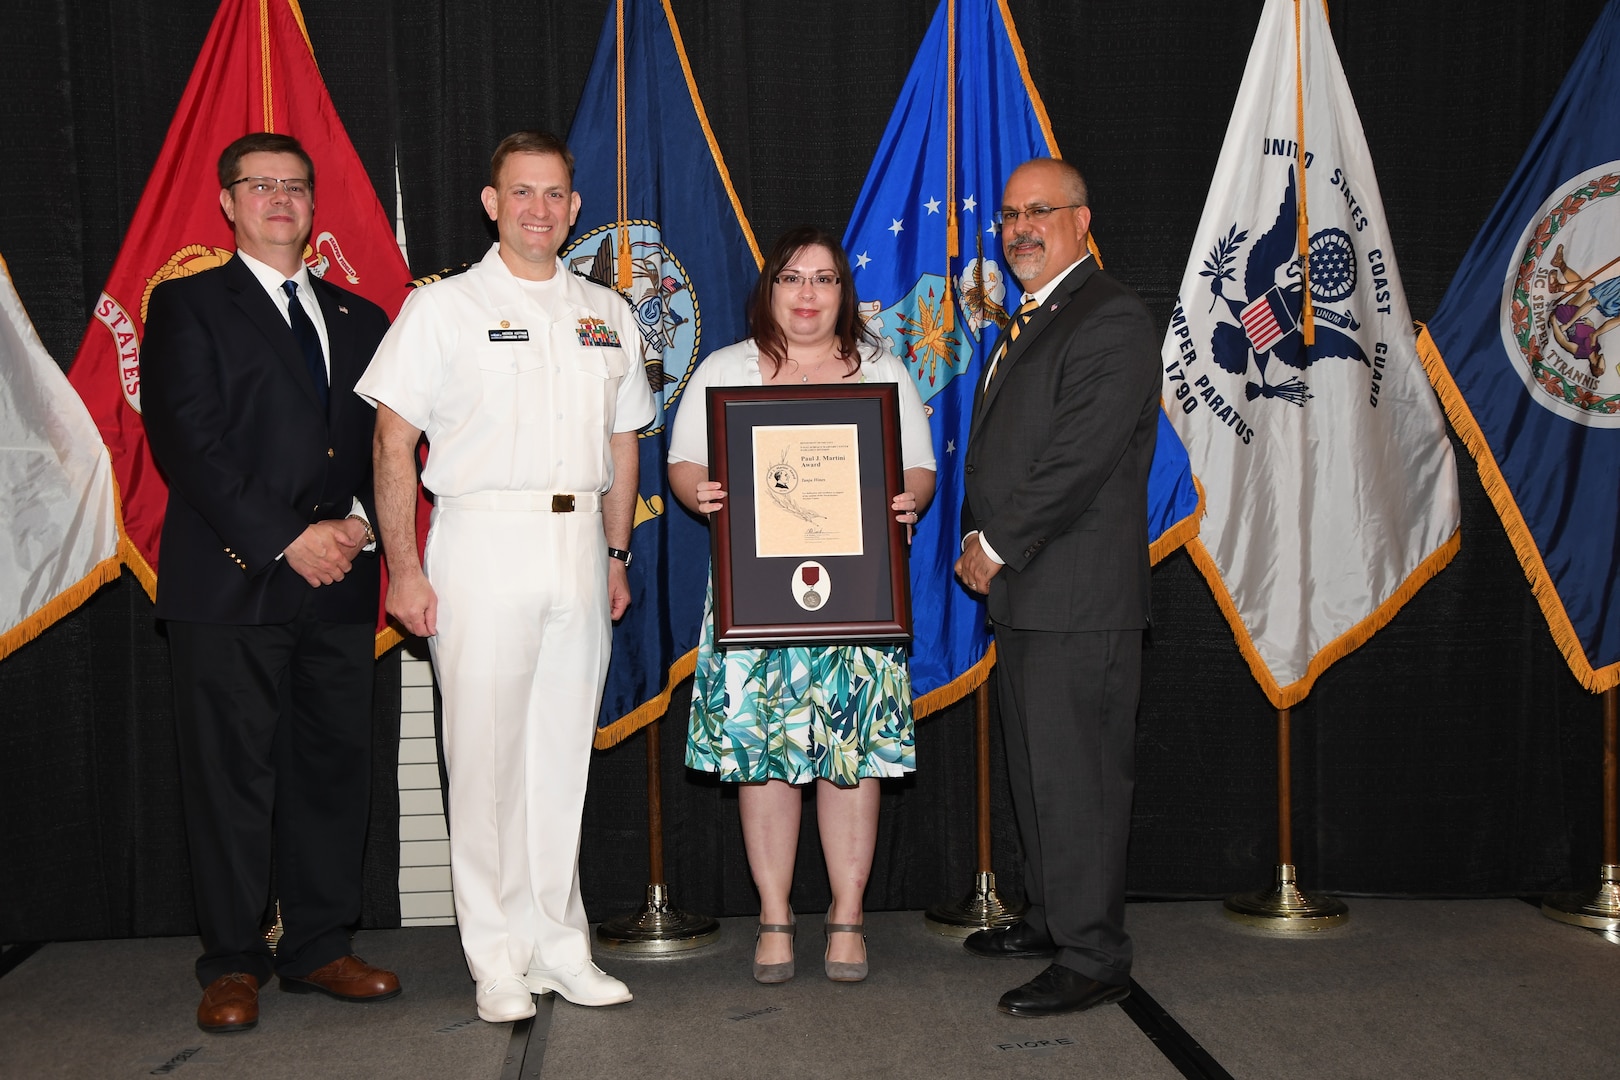 IMAGE: Tanja Hines is presented the Paul J. Martini Award at Naval Surface Warfare Center Dahlgren Division's annual awards ceremony, Apr. 26 at the Fredericksburg Expo and Conference Center.

The award is named in honor of Paul J. Martini, who was head of the Engineering Support Directorate of the Naval Ordnance Laboratory from November 1951 to December 1973.